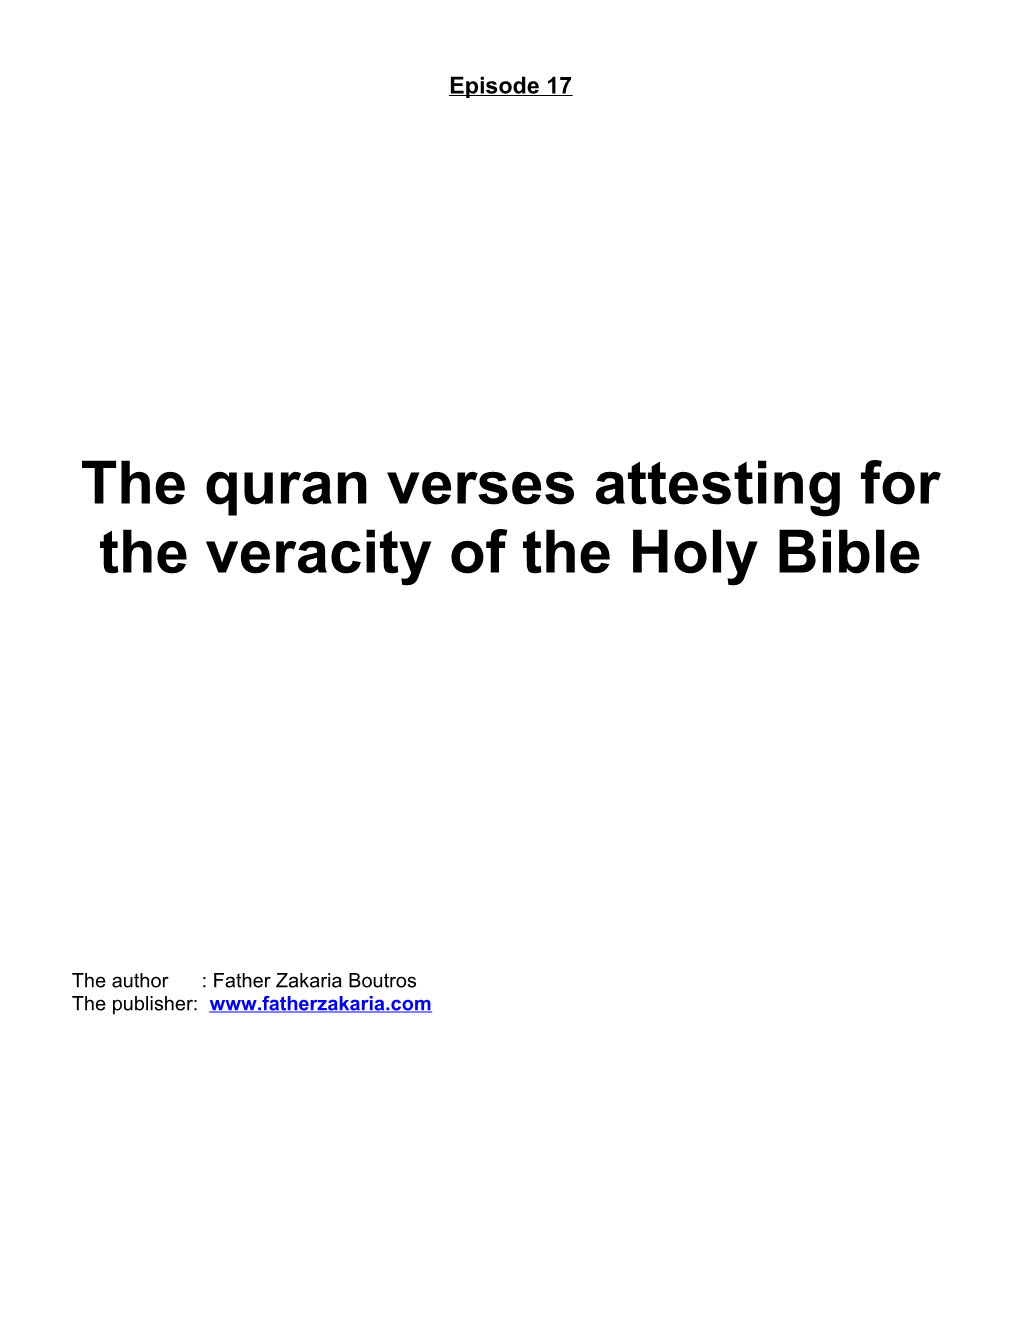 The Quran Verses Attesting for the Veracity of the Holy Bible